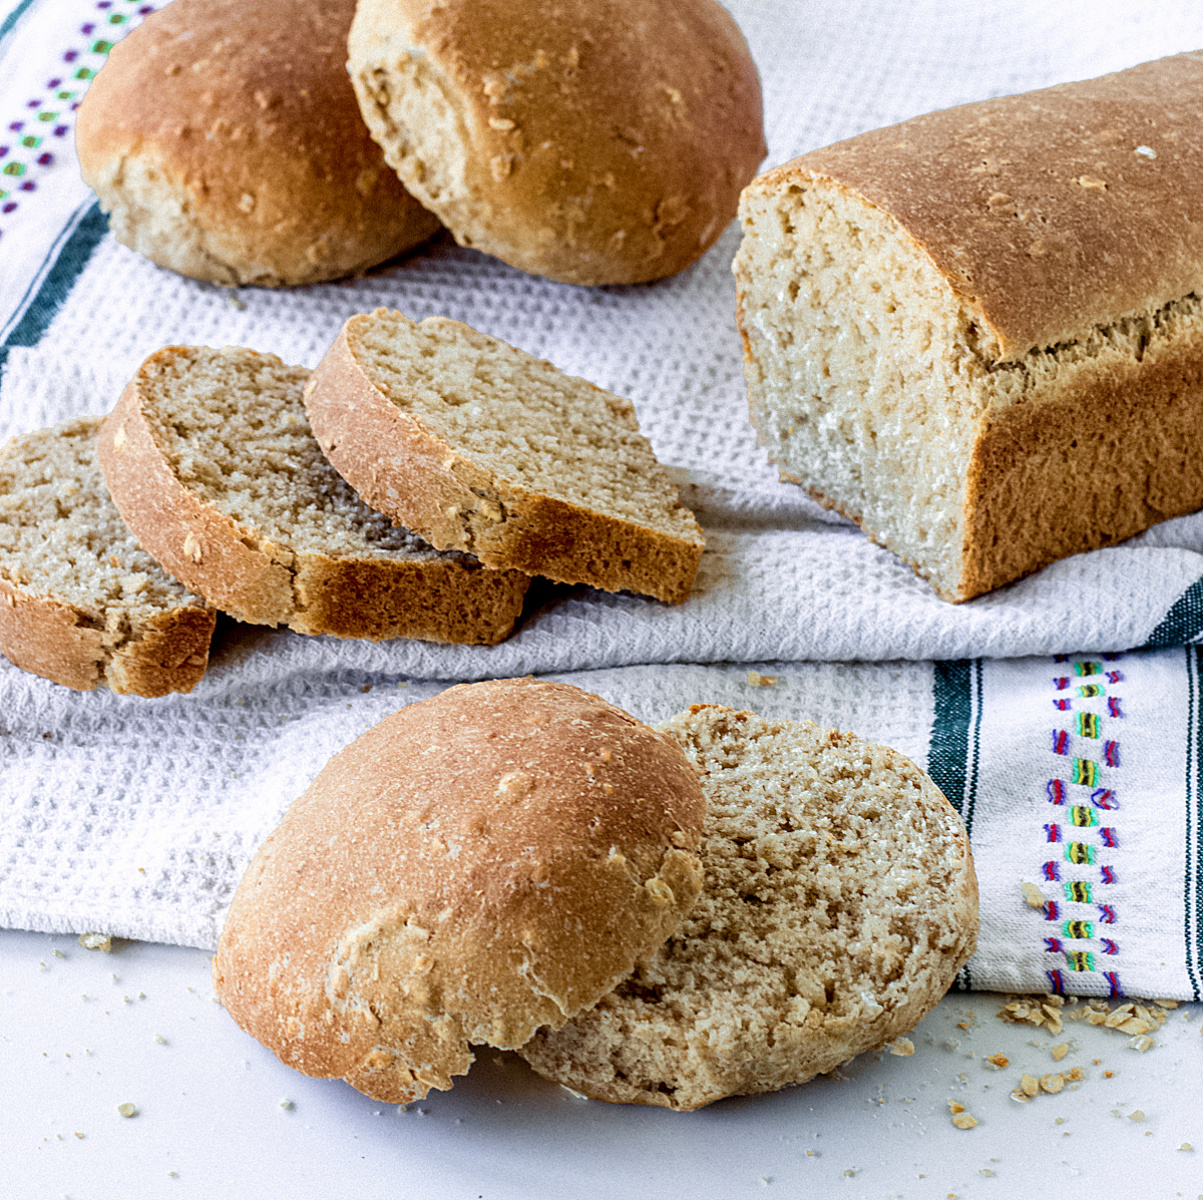 Loaf bread and buns on white kitchen towel, whole and sliced